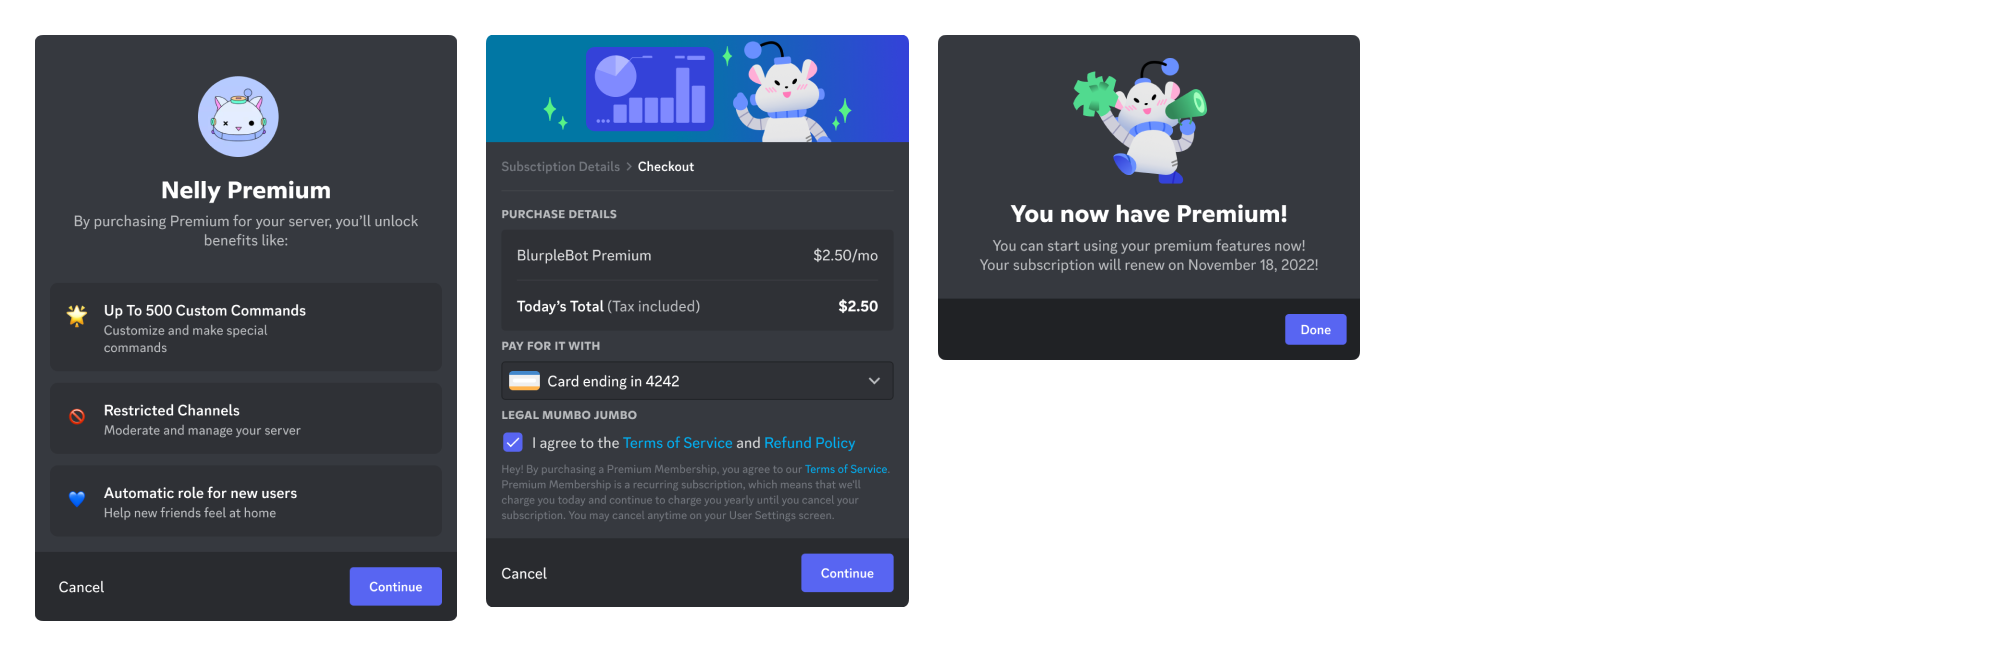 Discord is opening the monetization floodgates: get ready for  microtransaction stores and paid 'exclusive memes